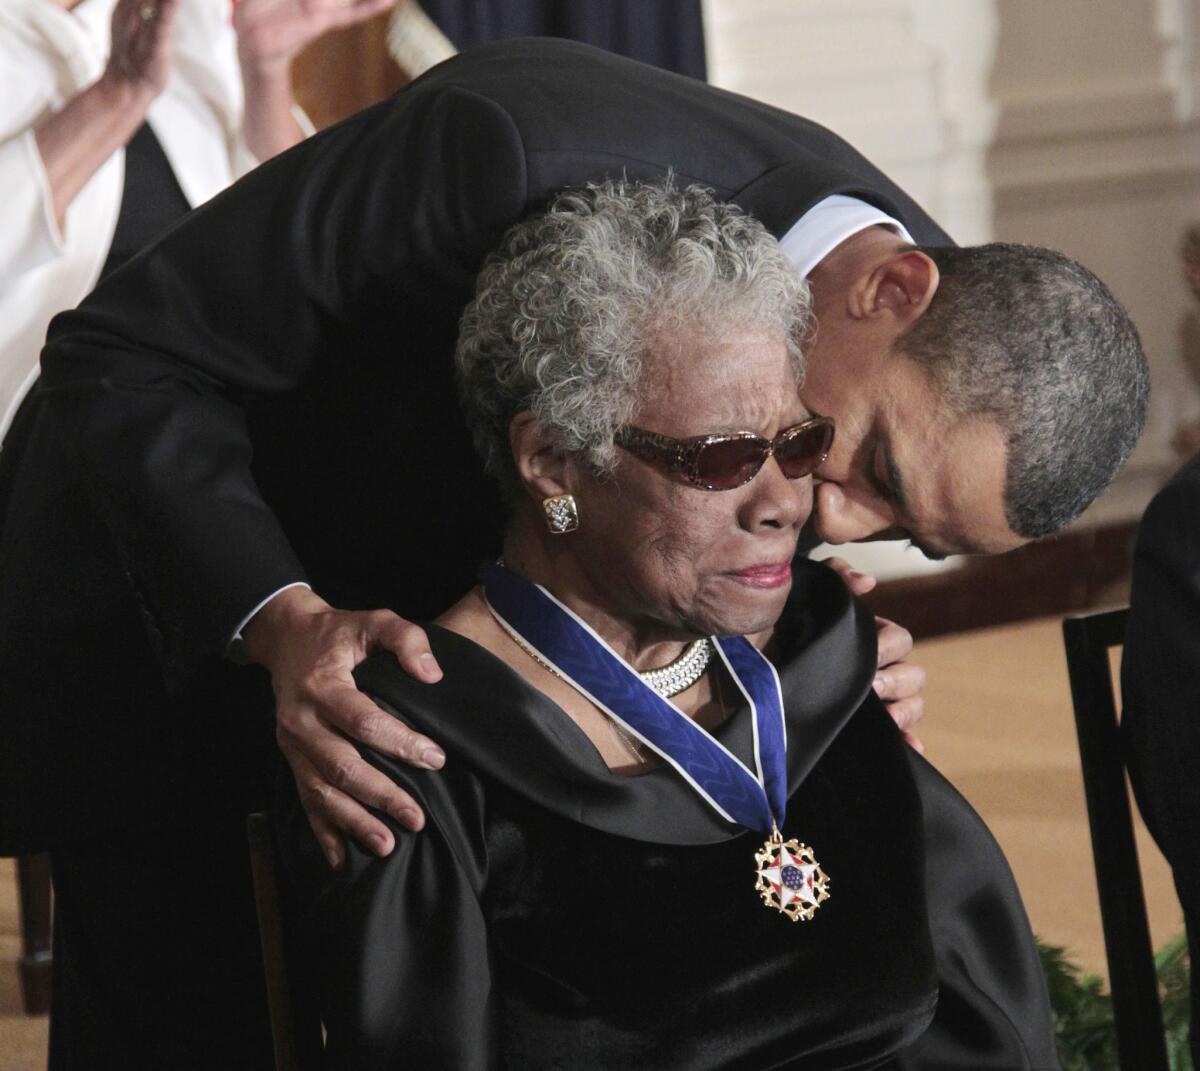 Maya Angelou, awarded the Medal of Freedom by President Obama in 2011, died Wednesday.